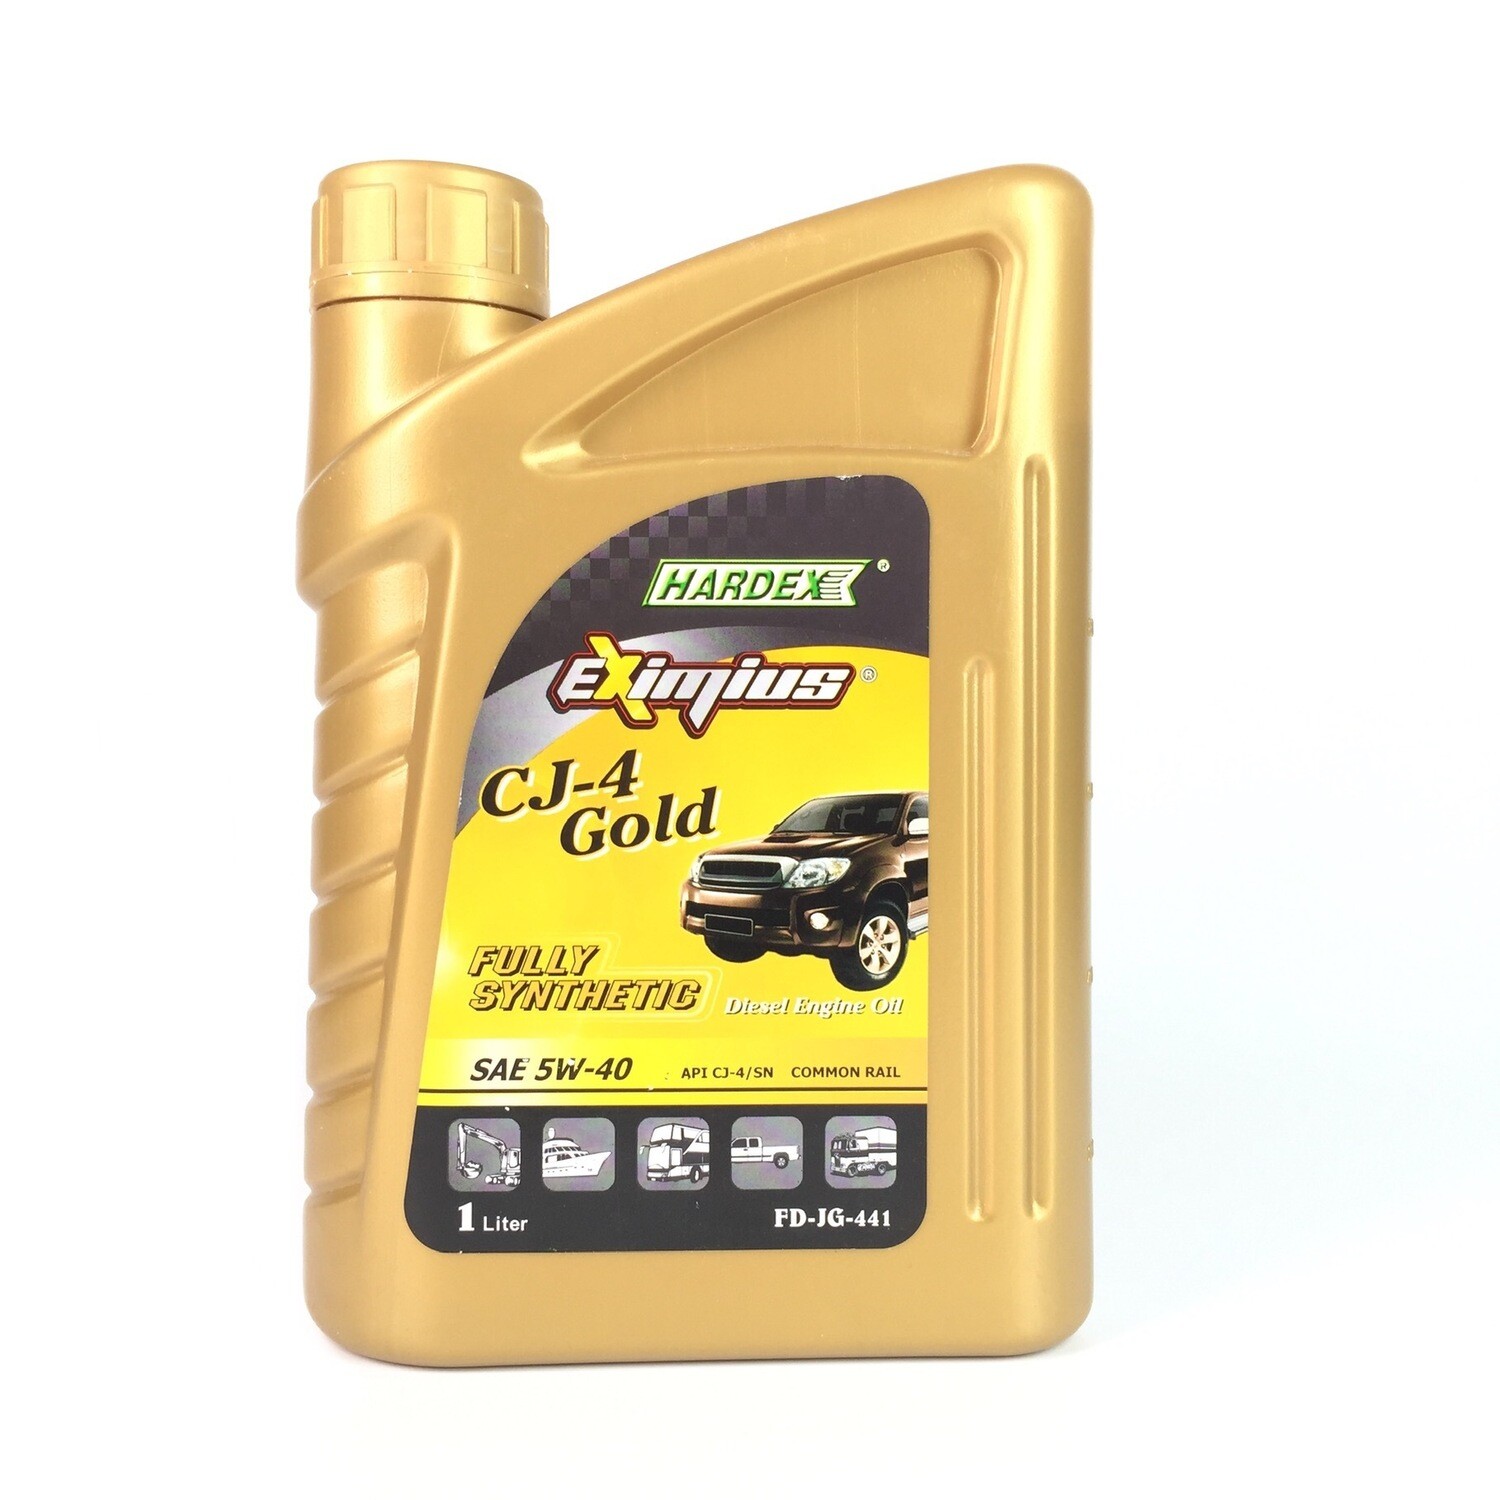 HARDEX Eximius CJ-4 Gold  SAE 5W-40 Fully Synthetic Diesel Engine Oil